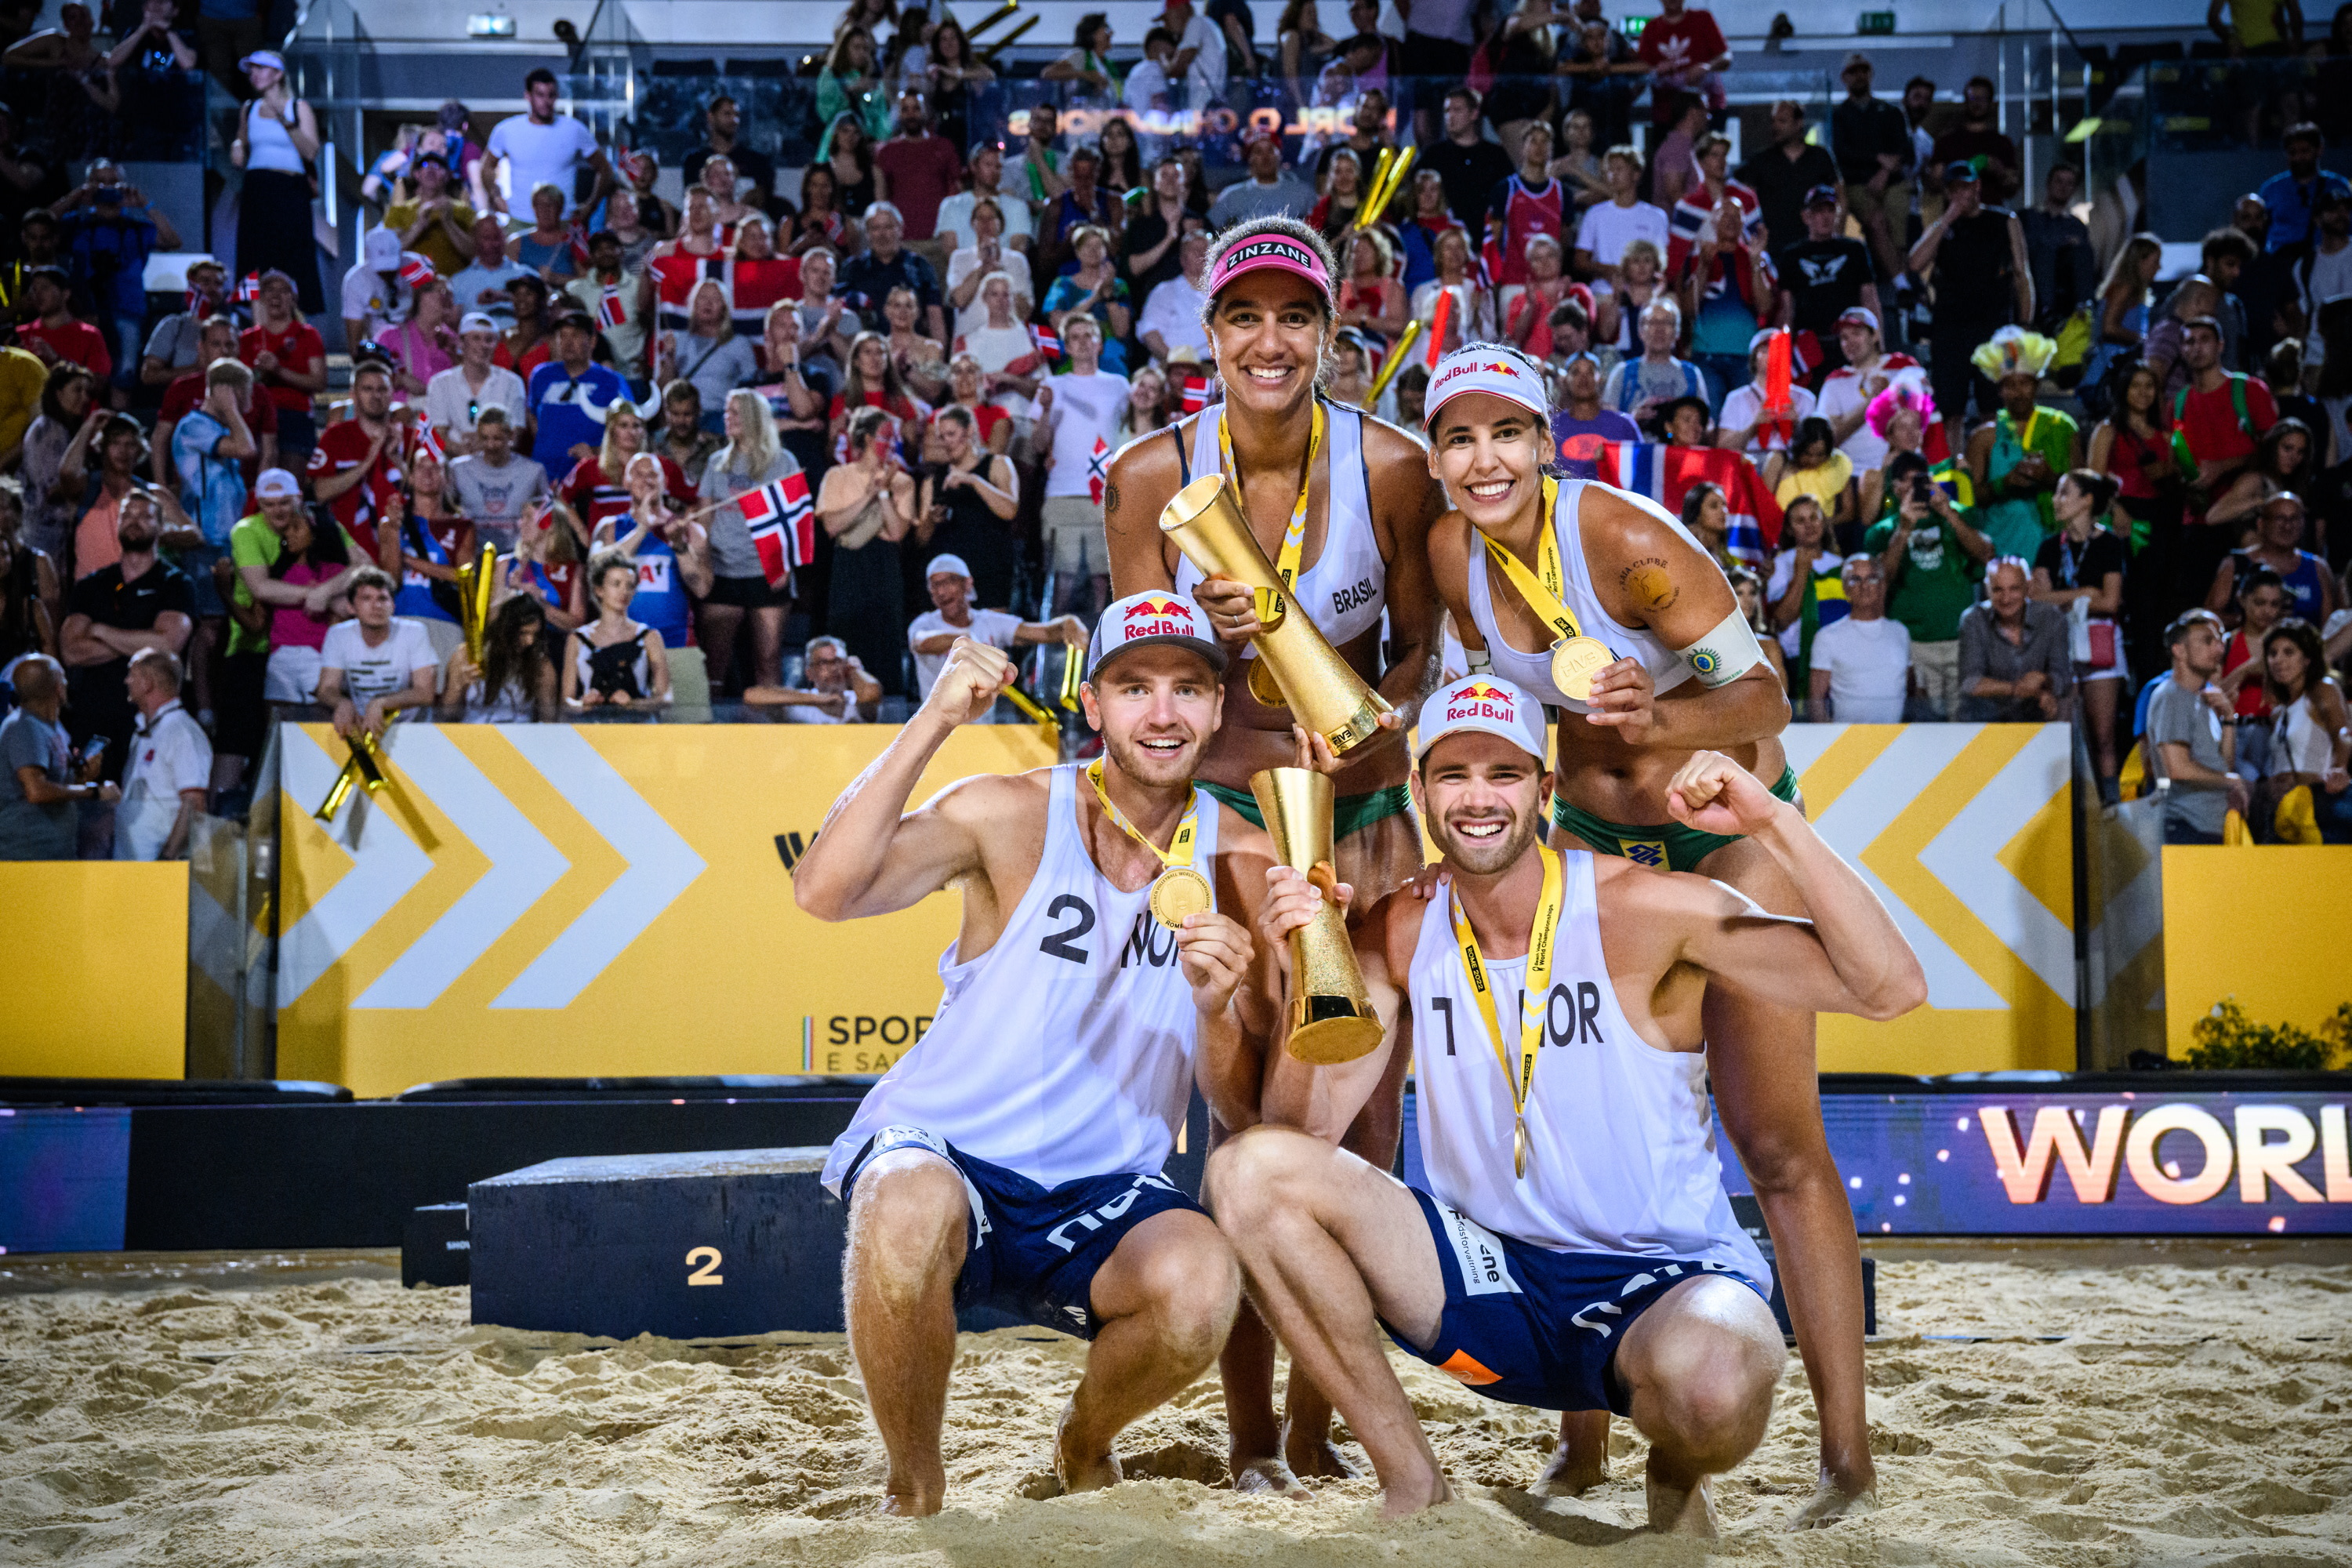 winners cup beach volleyball live